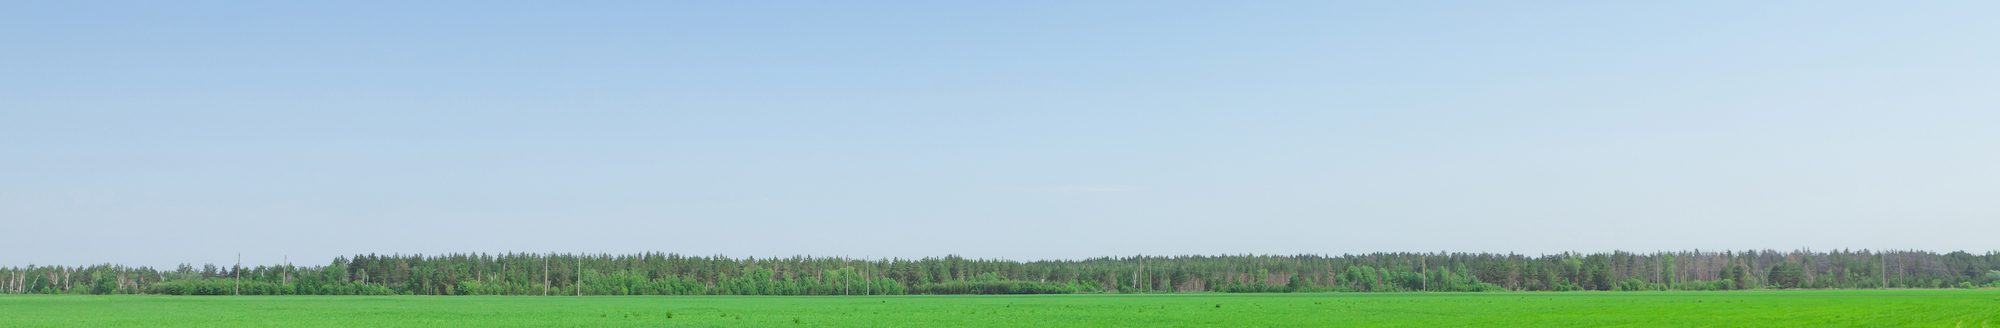 Summer landscape with green grass field and blue sky